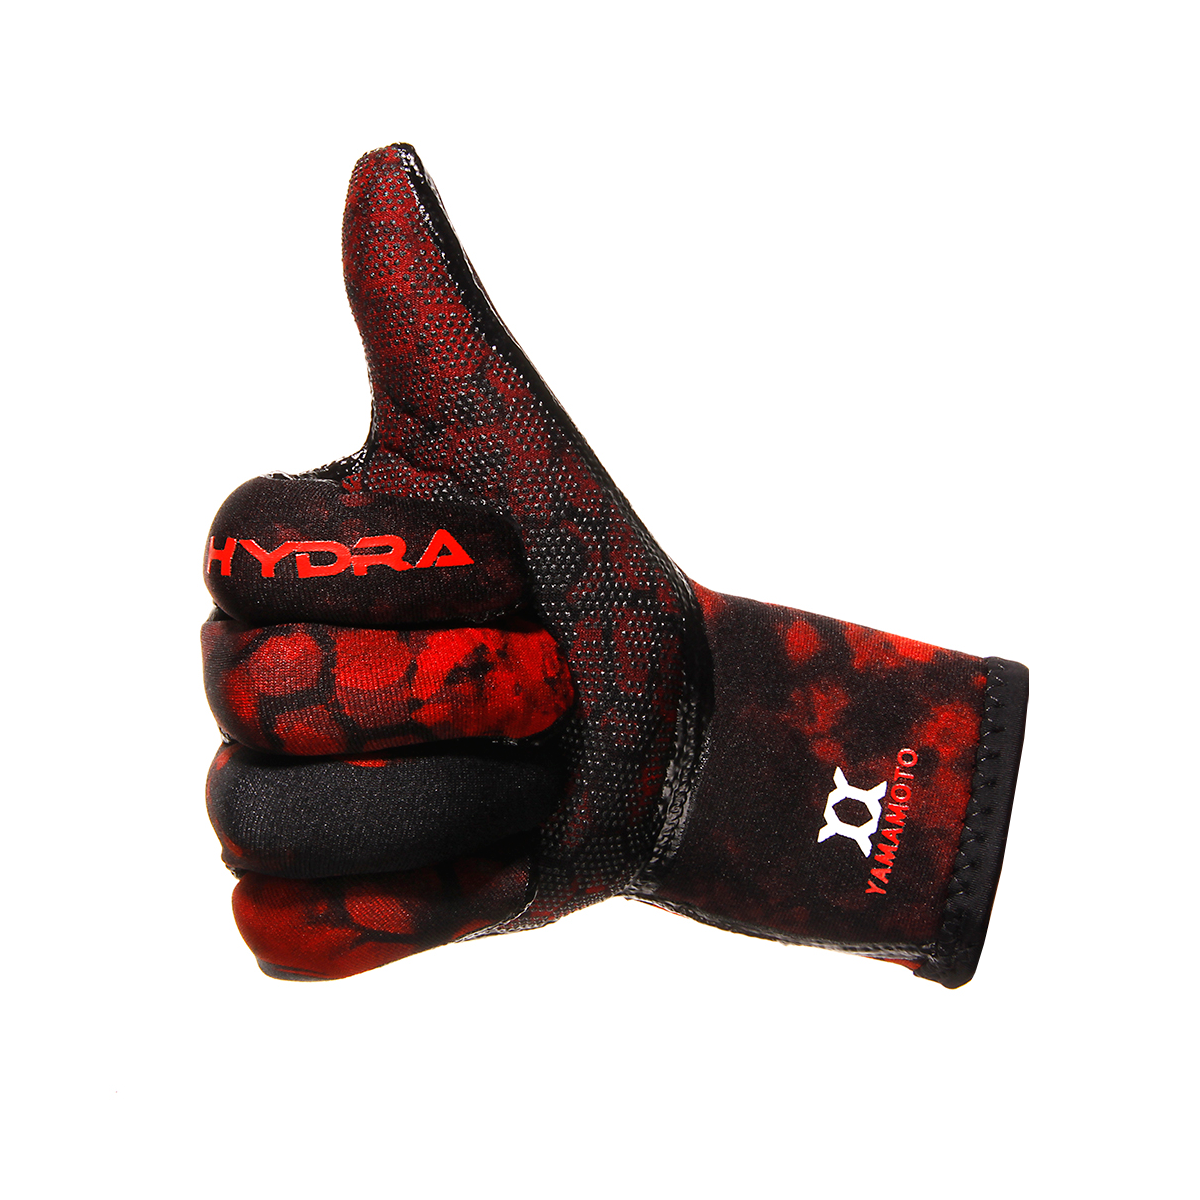 Hydra Red Camo Gloves for Spearfishing : Eurodiveshop